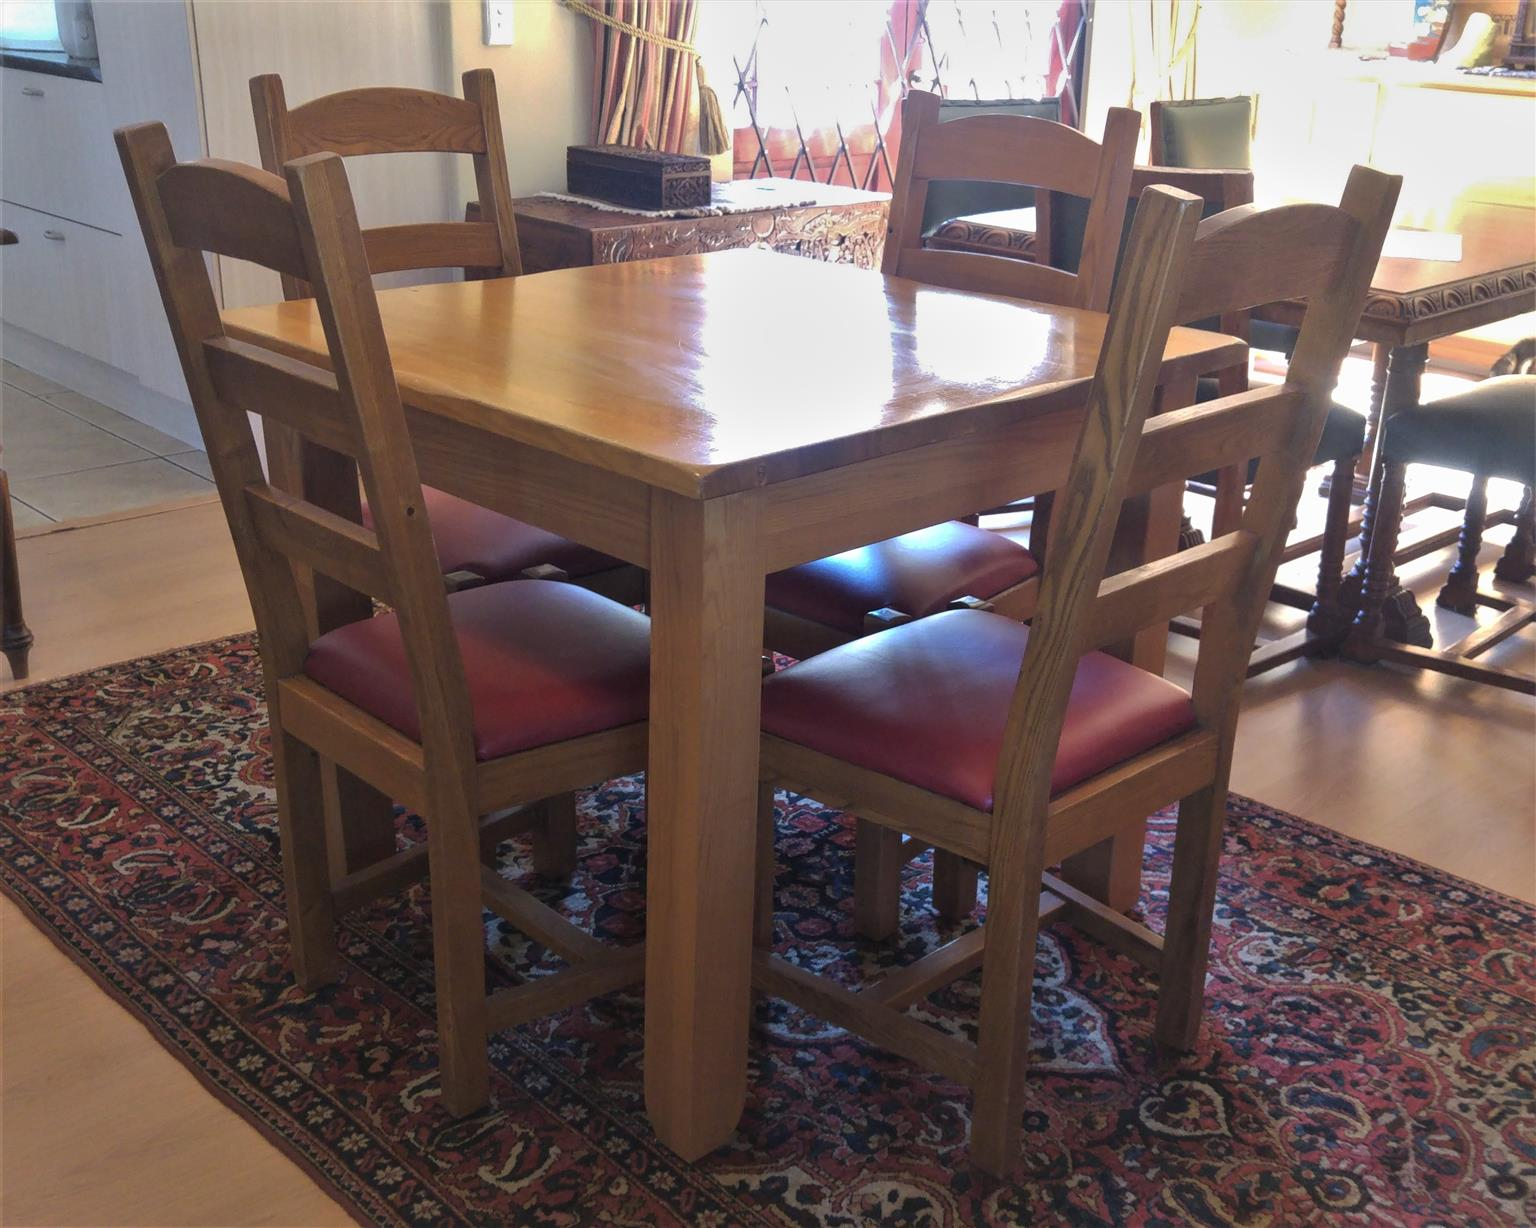 Solid 4 Seater Oak Dining Room Suite With 4 Matching Chairs Chairs Have Drop In Seats And Are High Backedrecently Reupholstered Excellent in size 1536 X 1228